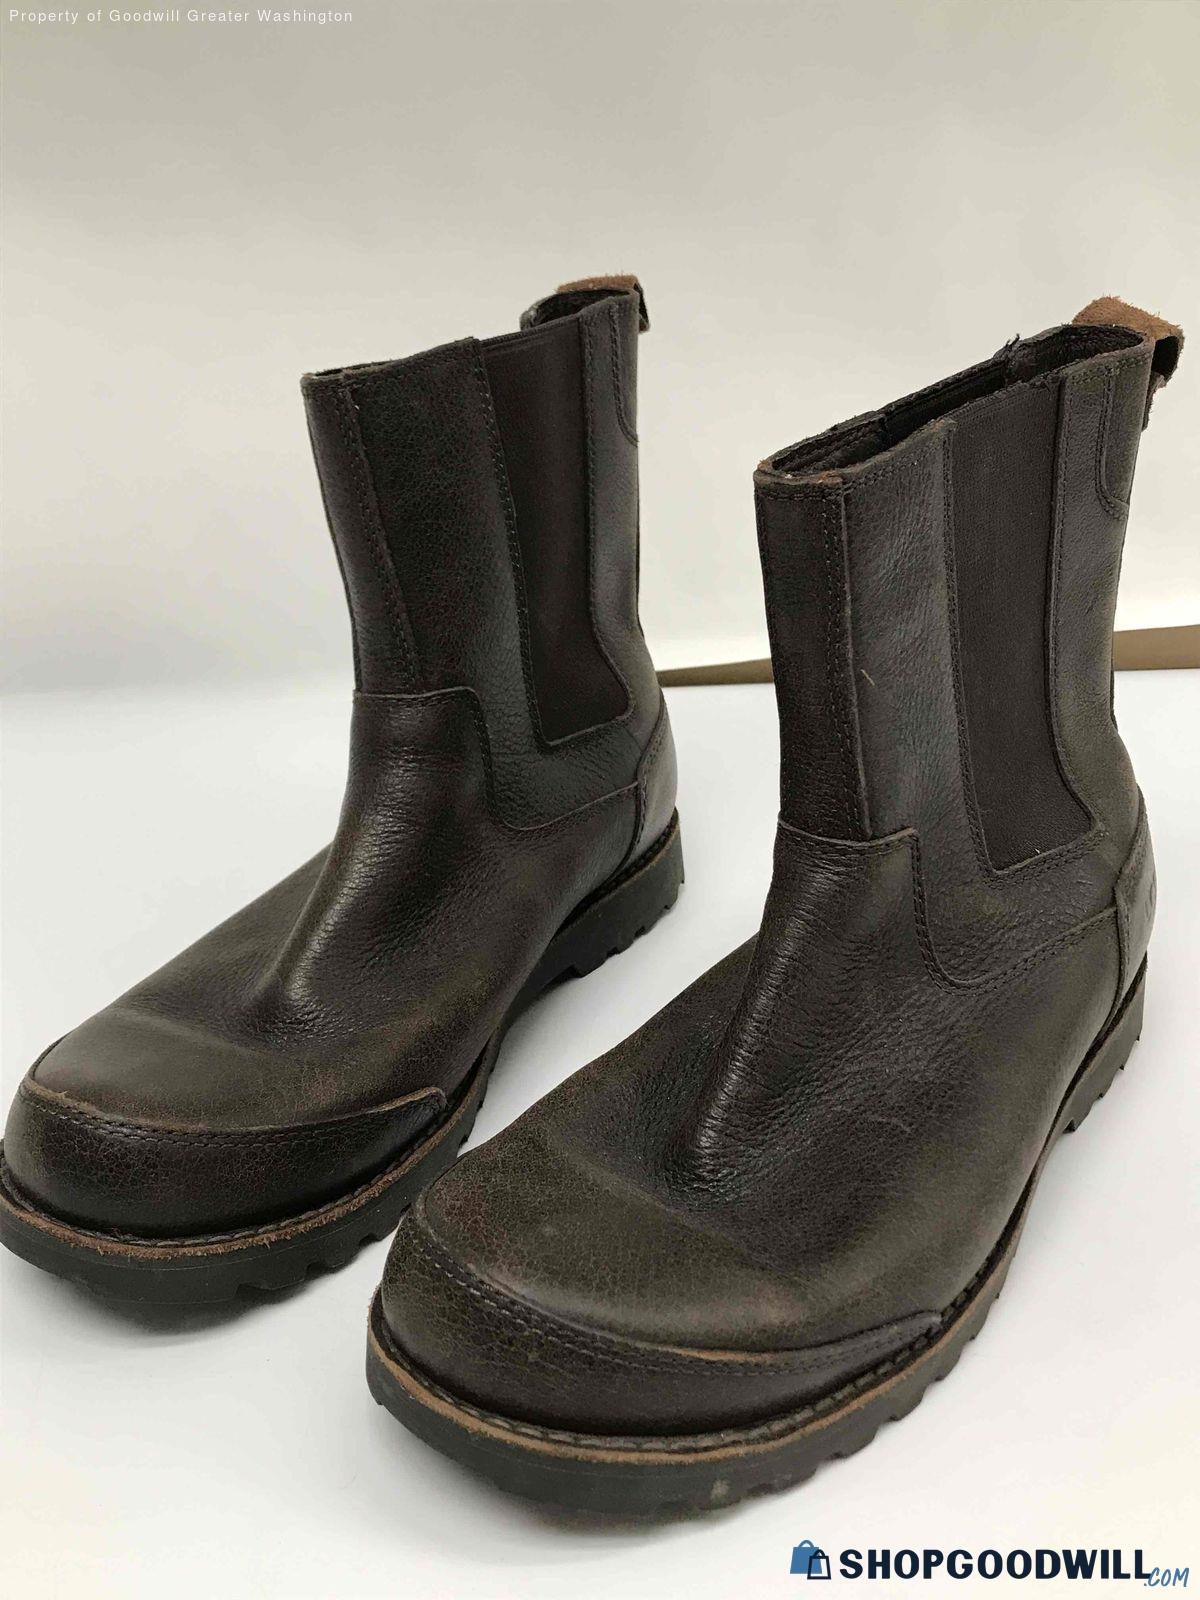 UGG Men Brown Ankle Boots Size 9 - shopgoodwill.com